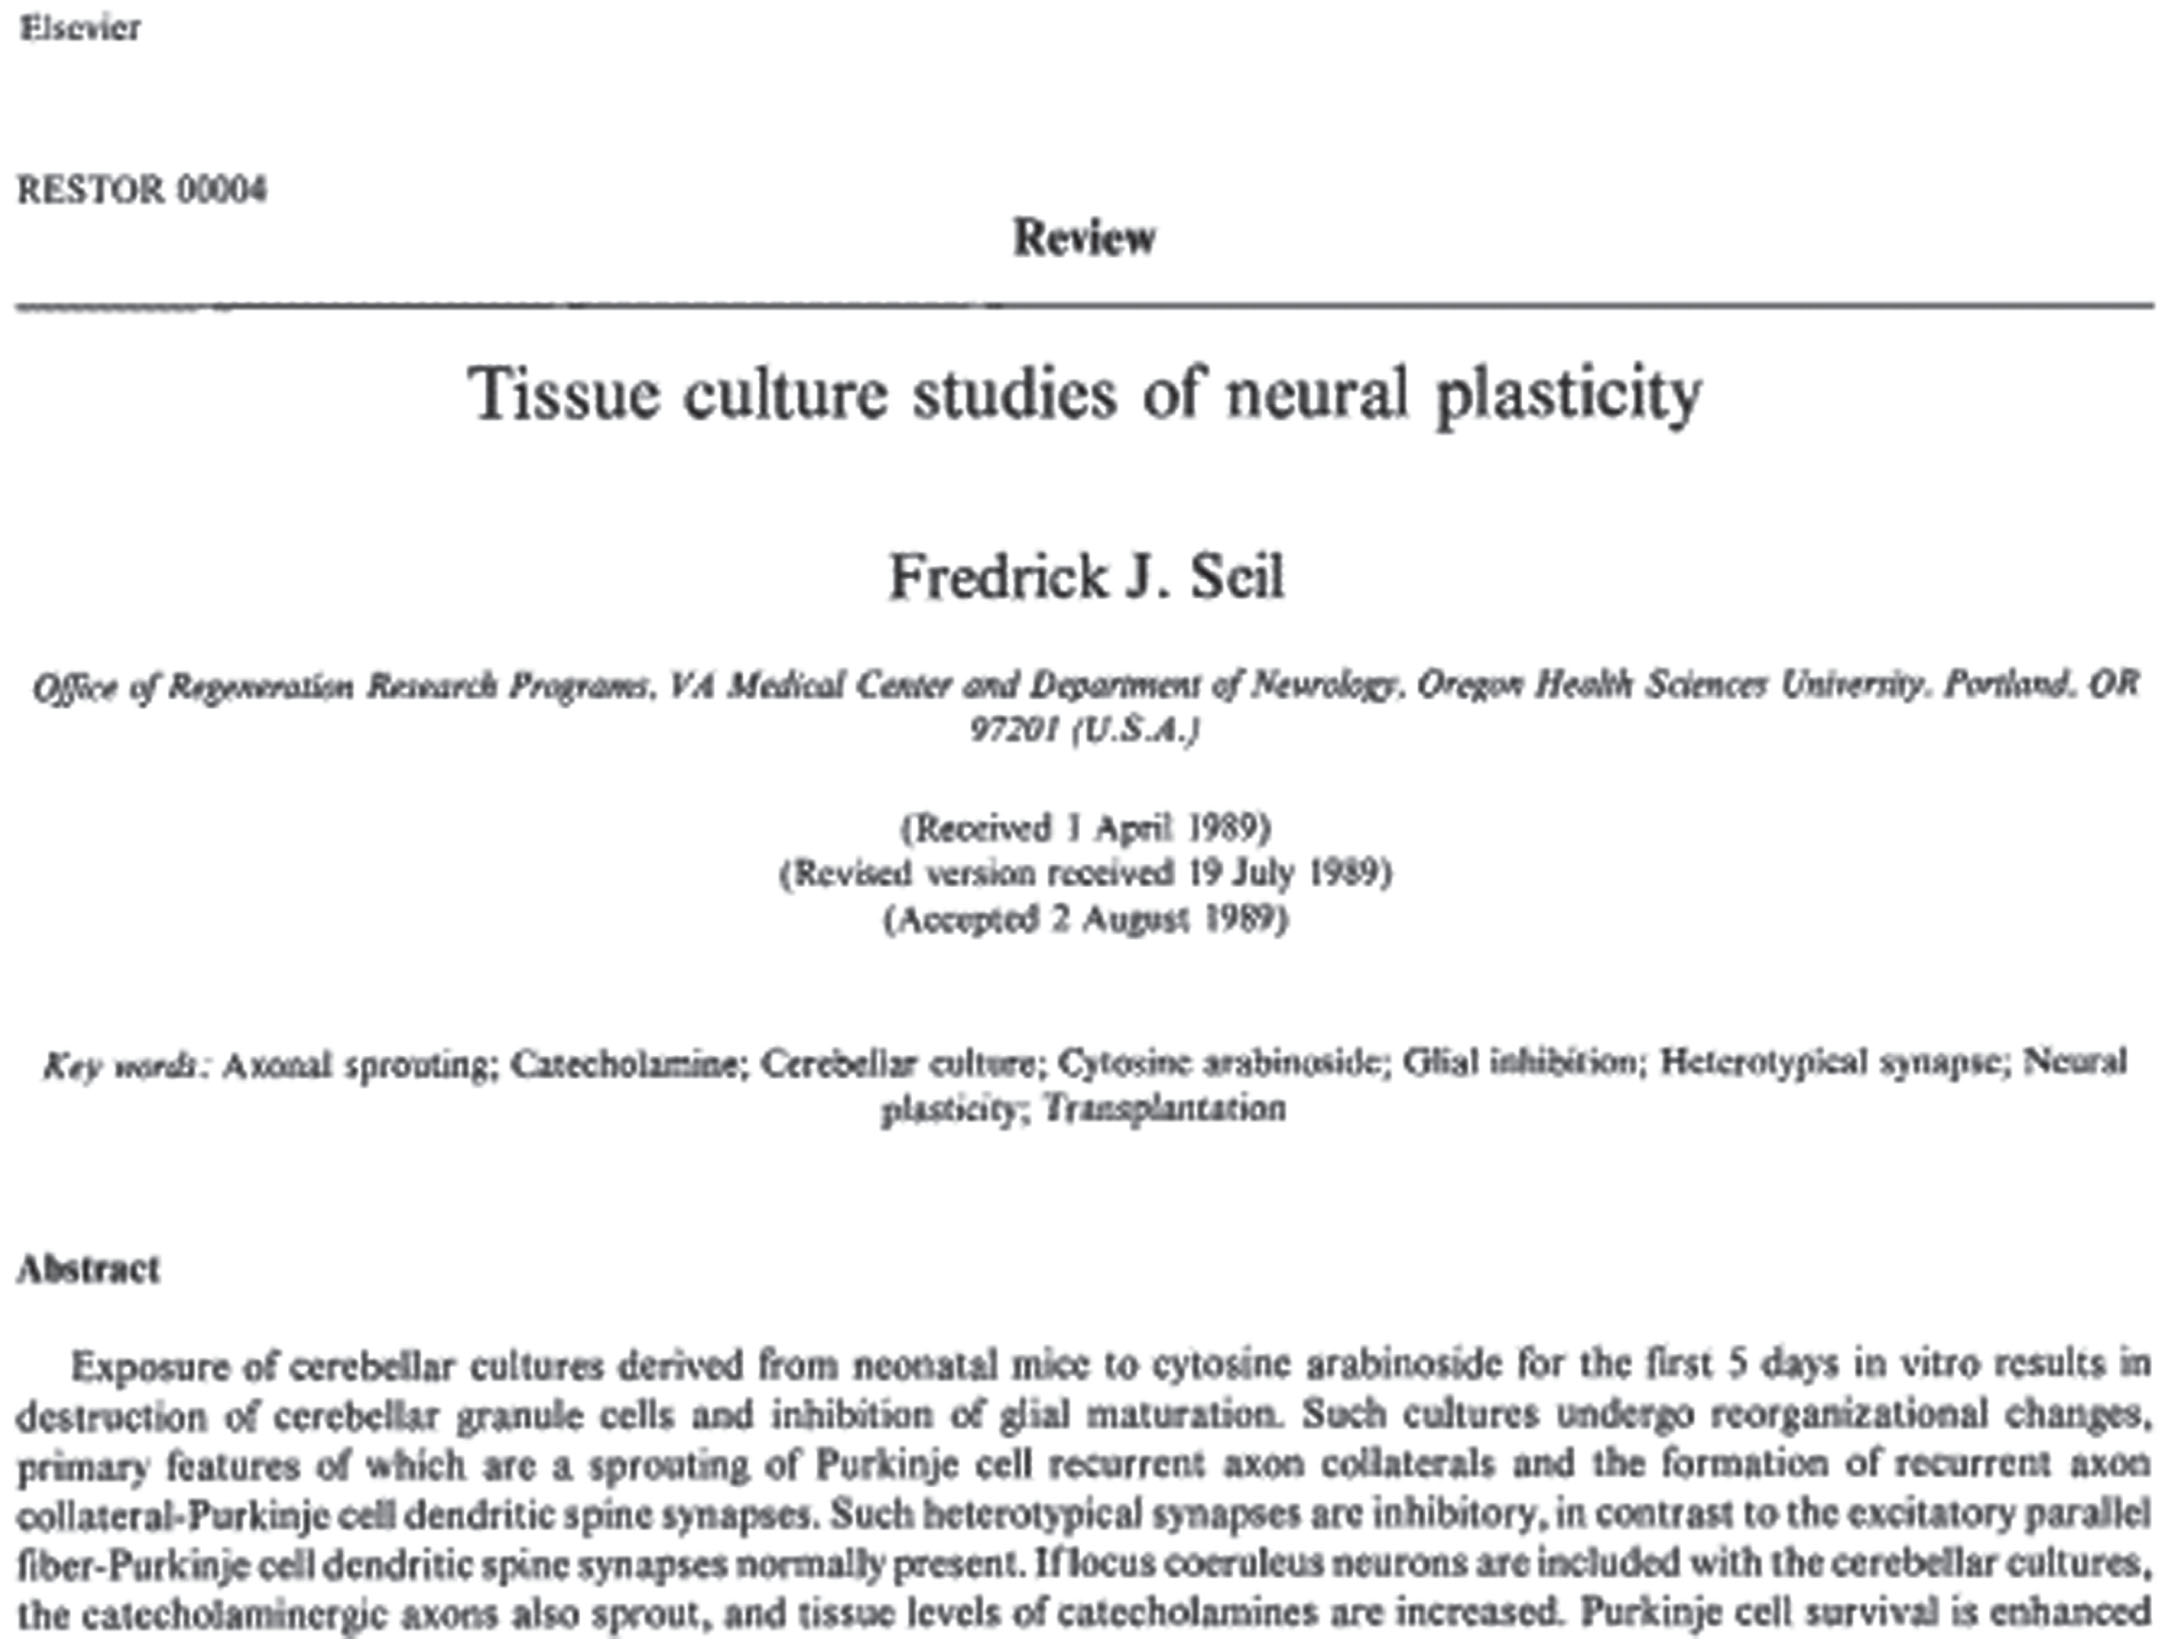 First article published in RNN [RNN-1989, vol. 1, no. 1, pp. 1-11].